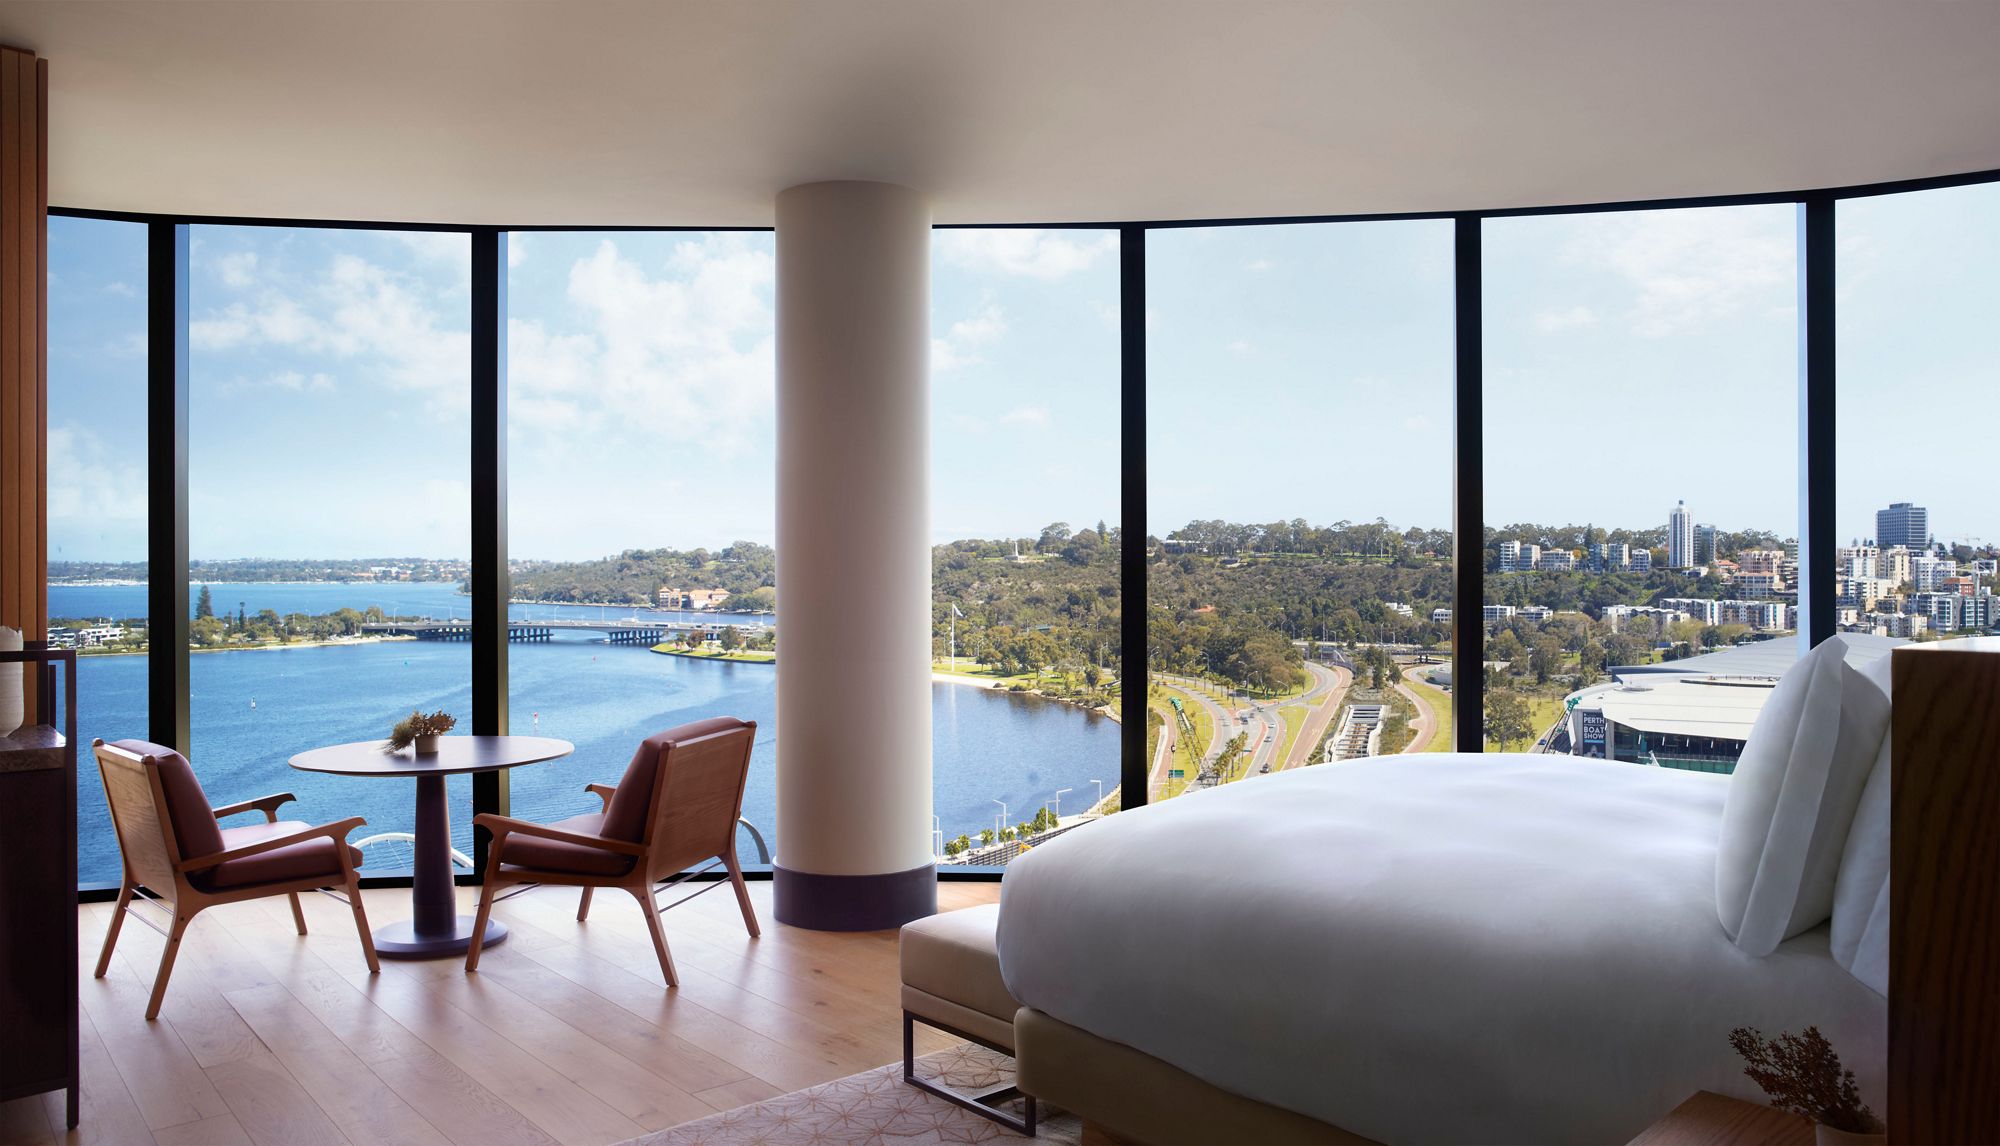 a room with a large window overlooking a body of water